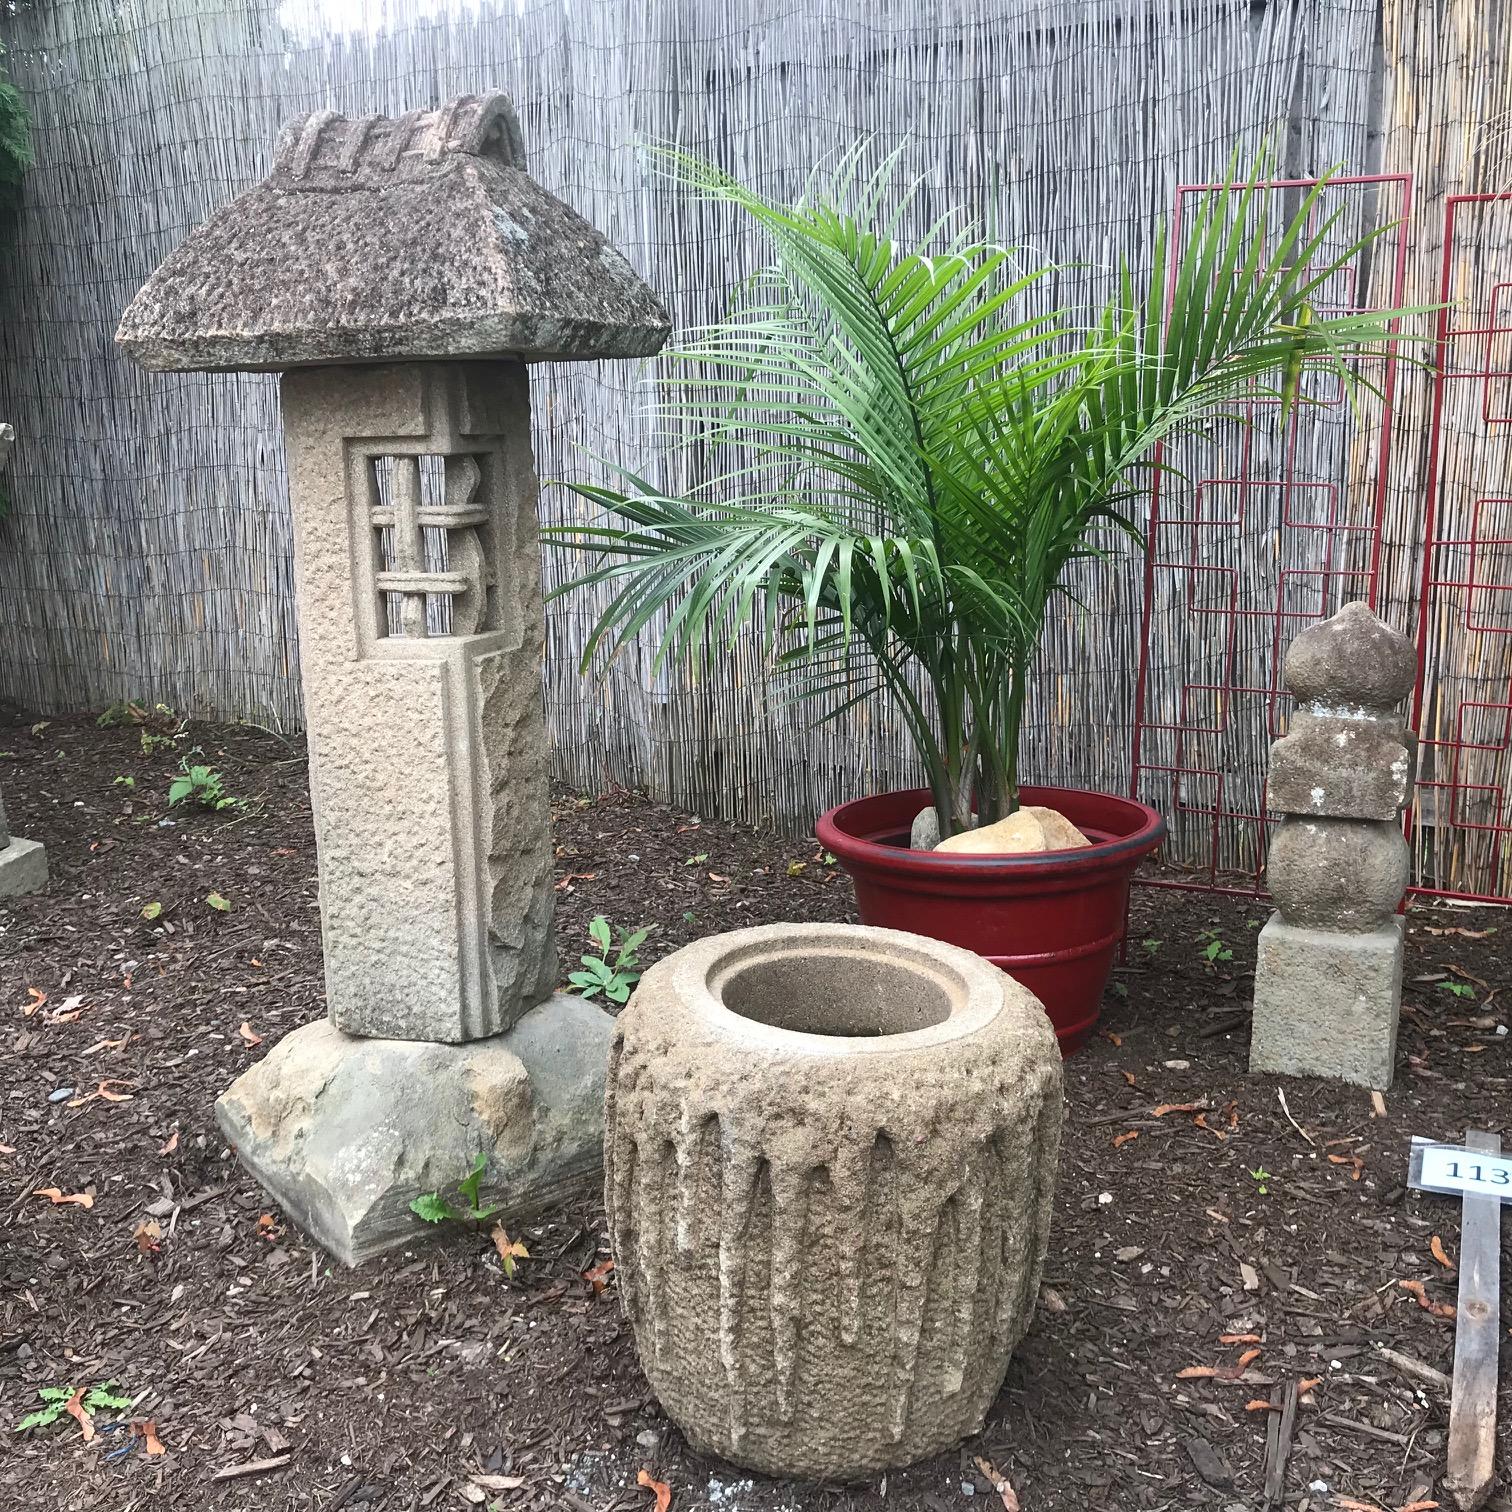 From our recent Japanese acquisitions travels.

Japan an unusual old “post” style hand-carved stone lantern with a unique Minka Mountain House roof and post form body- a rarely seen, unusual and unique combination, three sections. This is the first